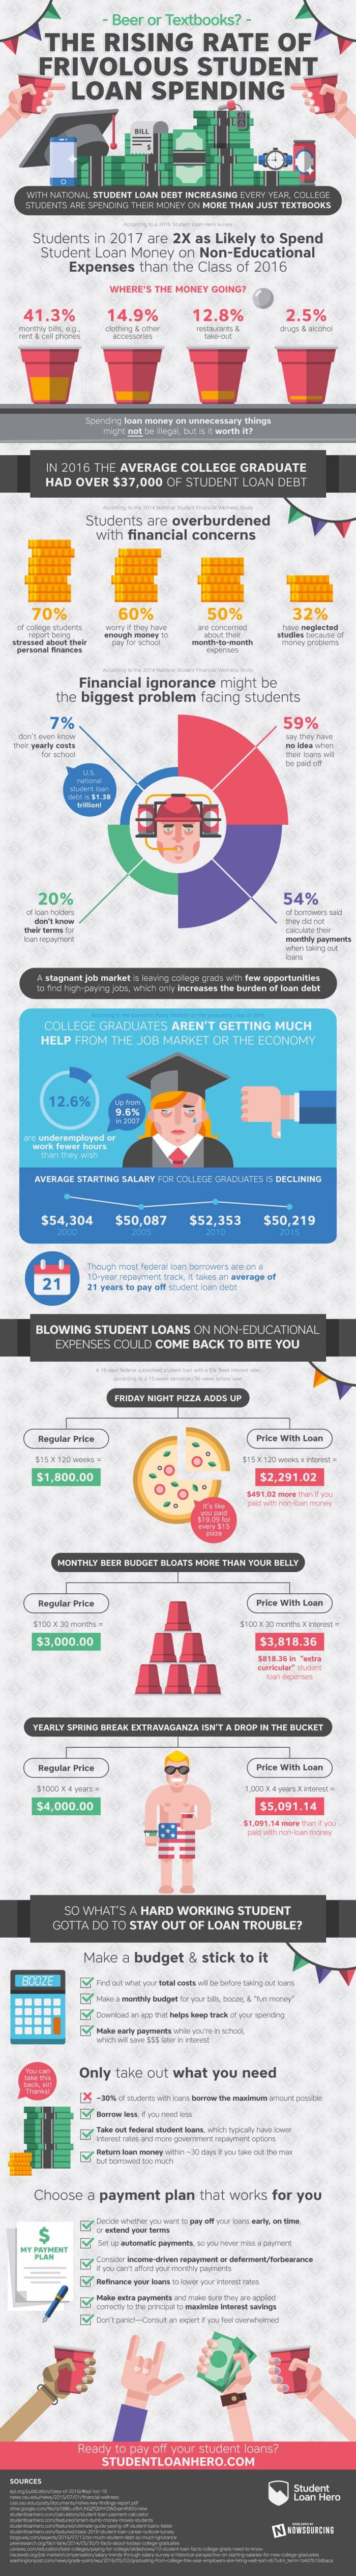 College Students Spend Their Student Loan